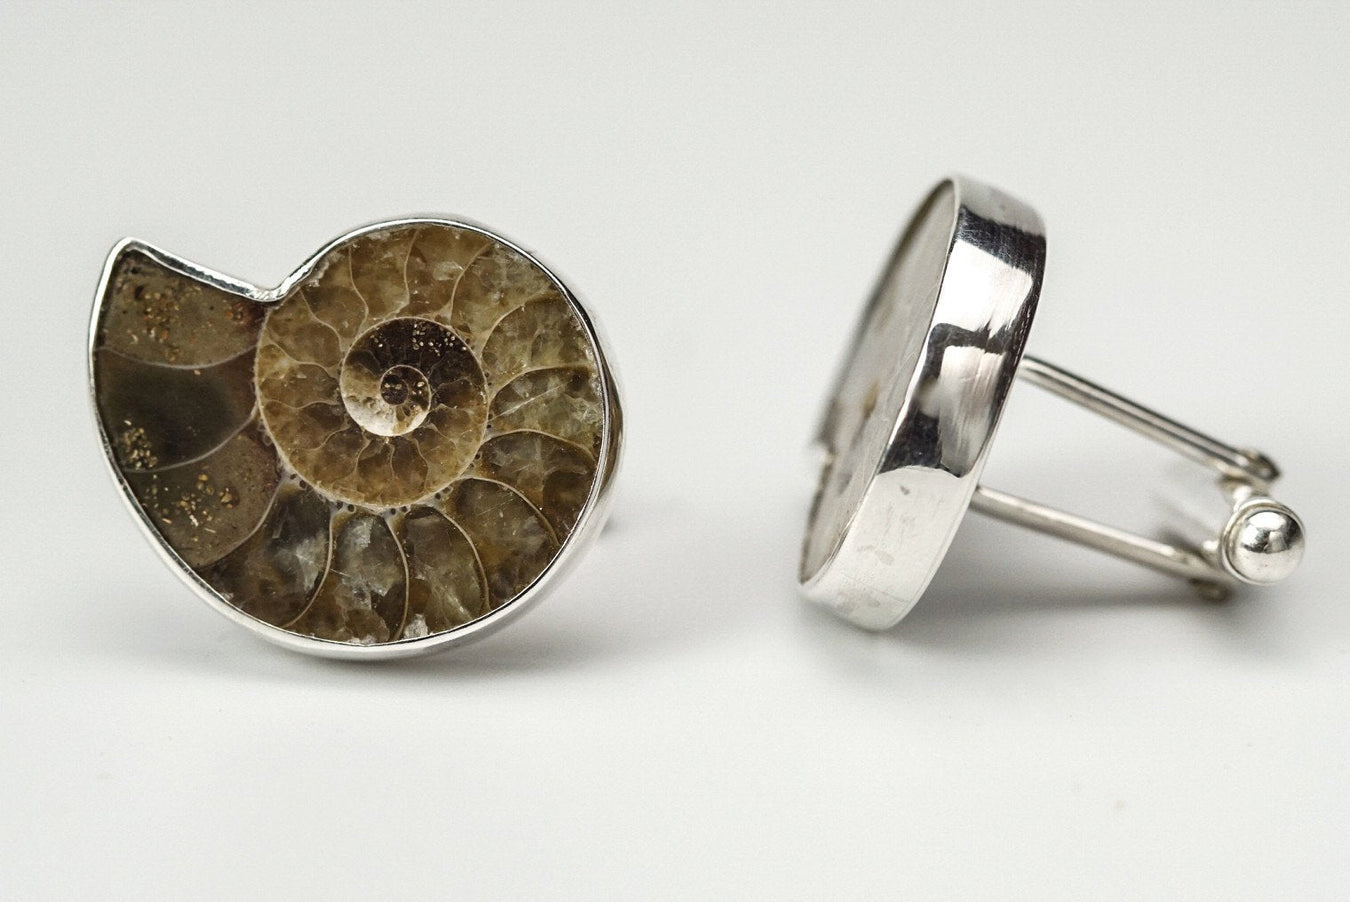 Cufflinks - By Price: Lowest to Highest